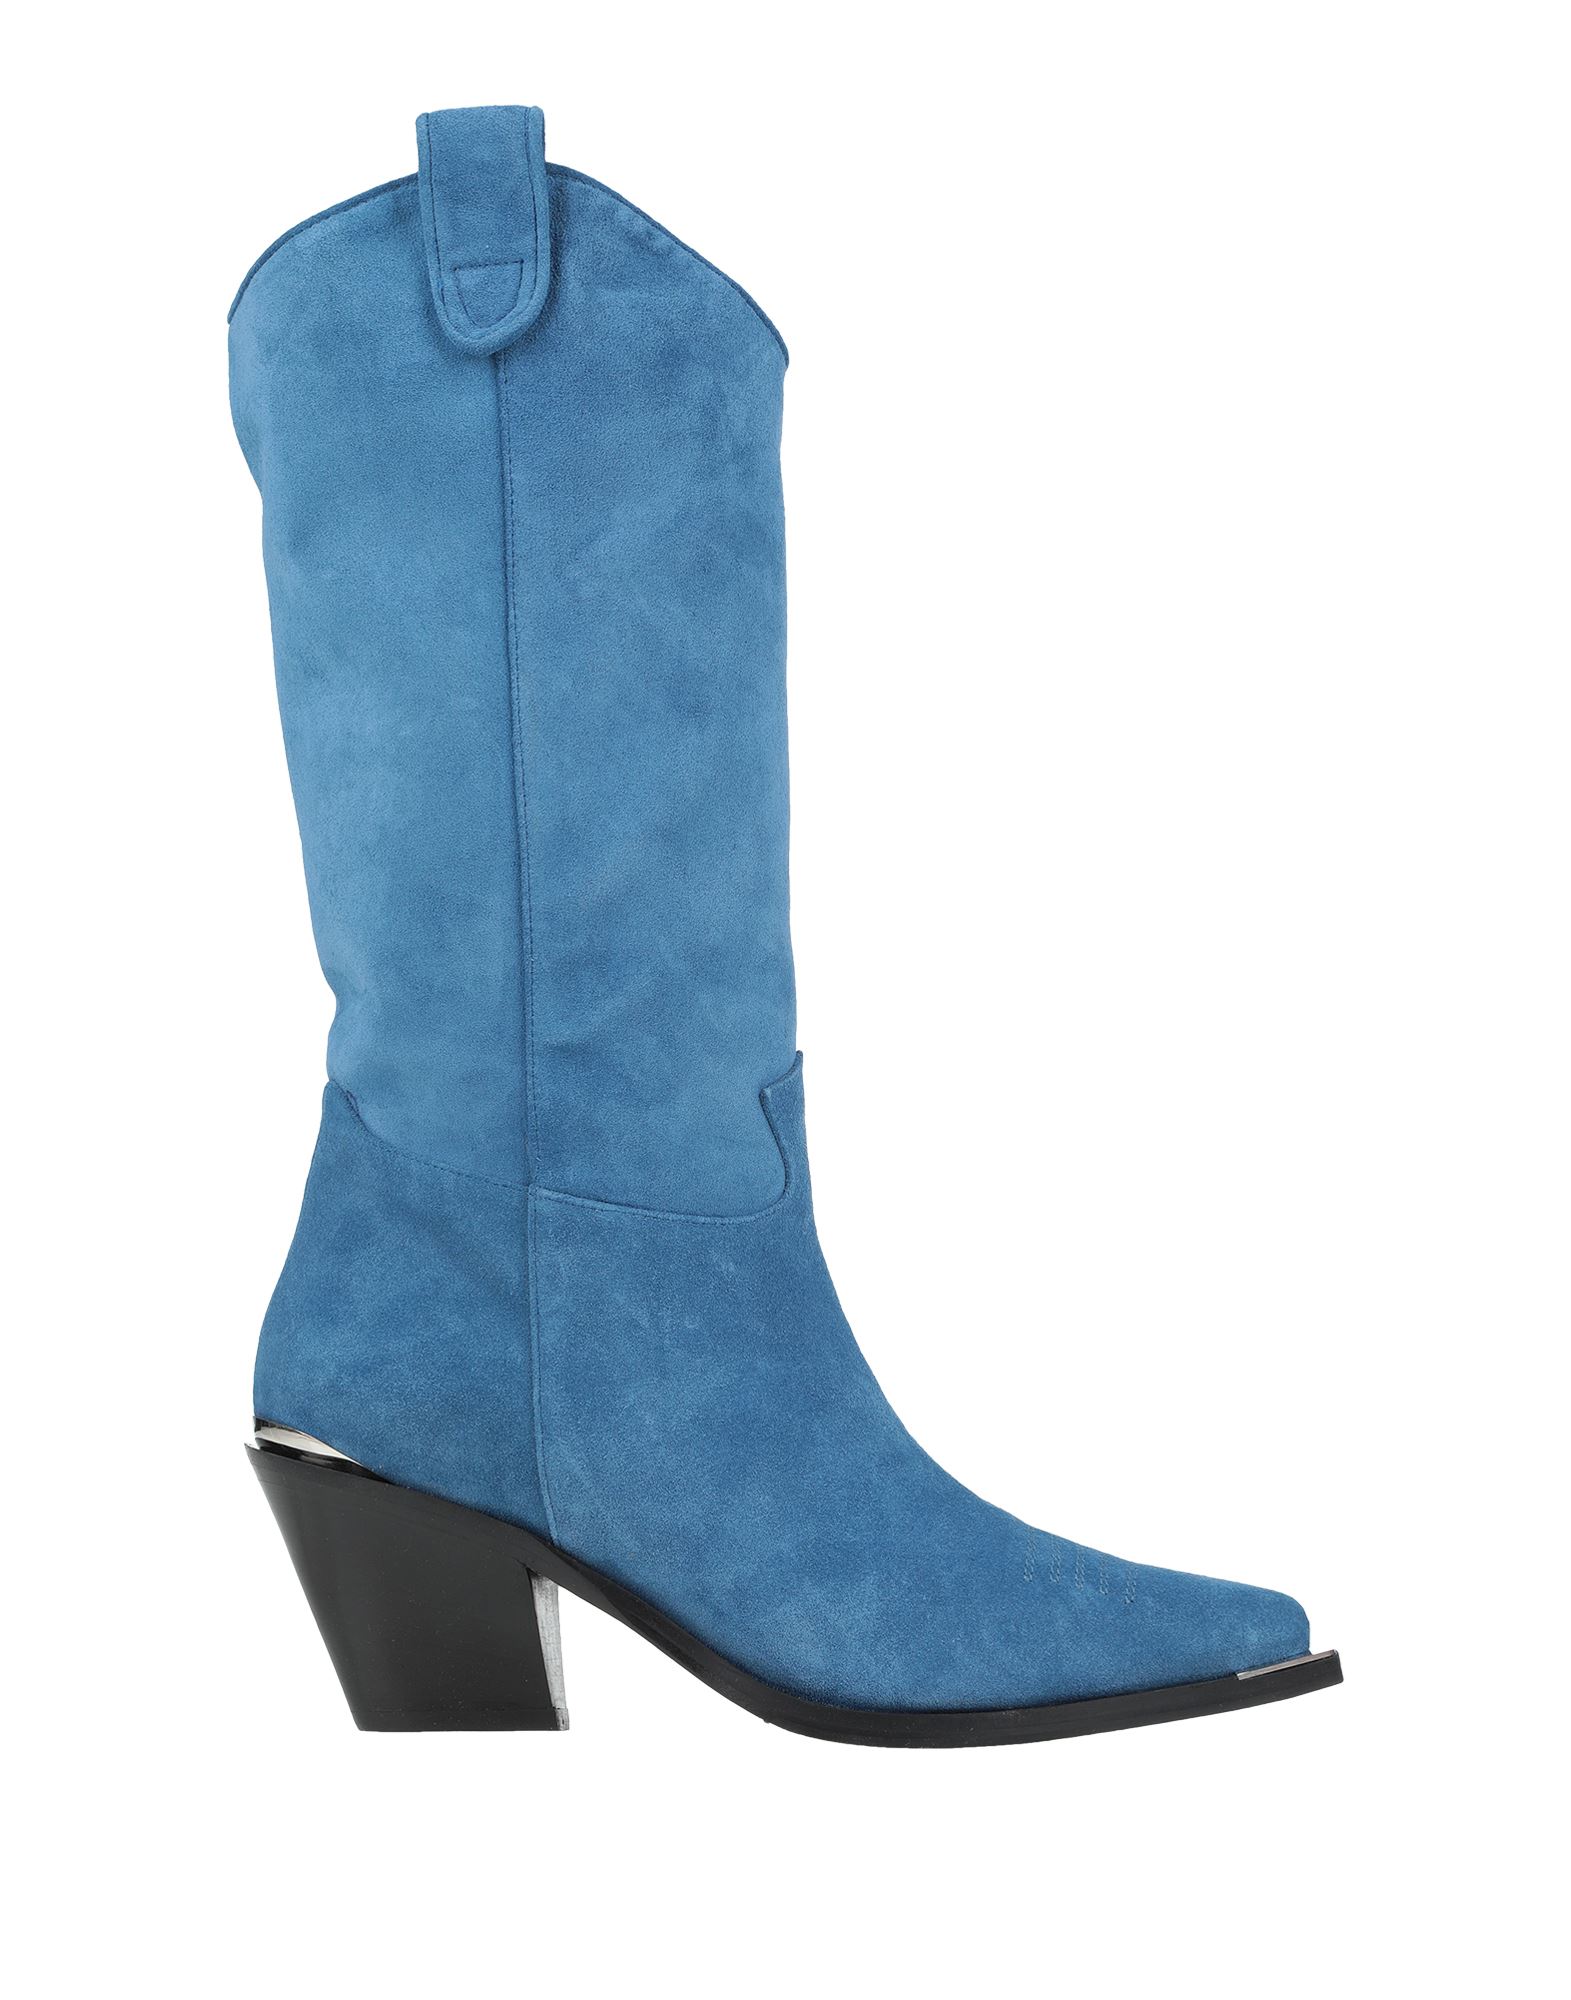 Aldo Castagna For Shabby Chic Knee Boots In Azure